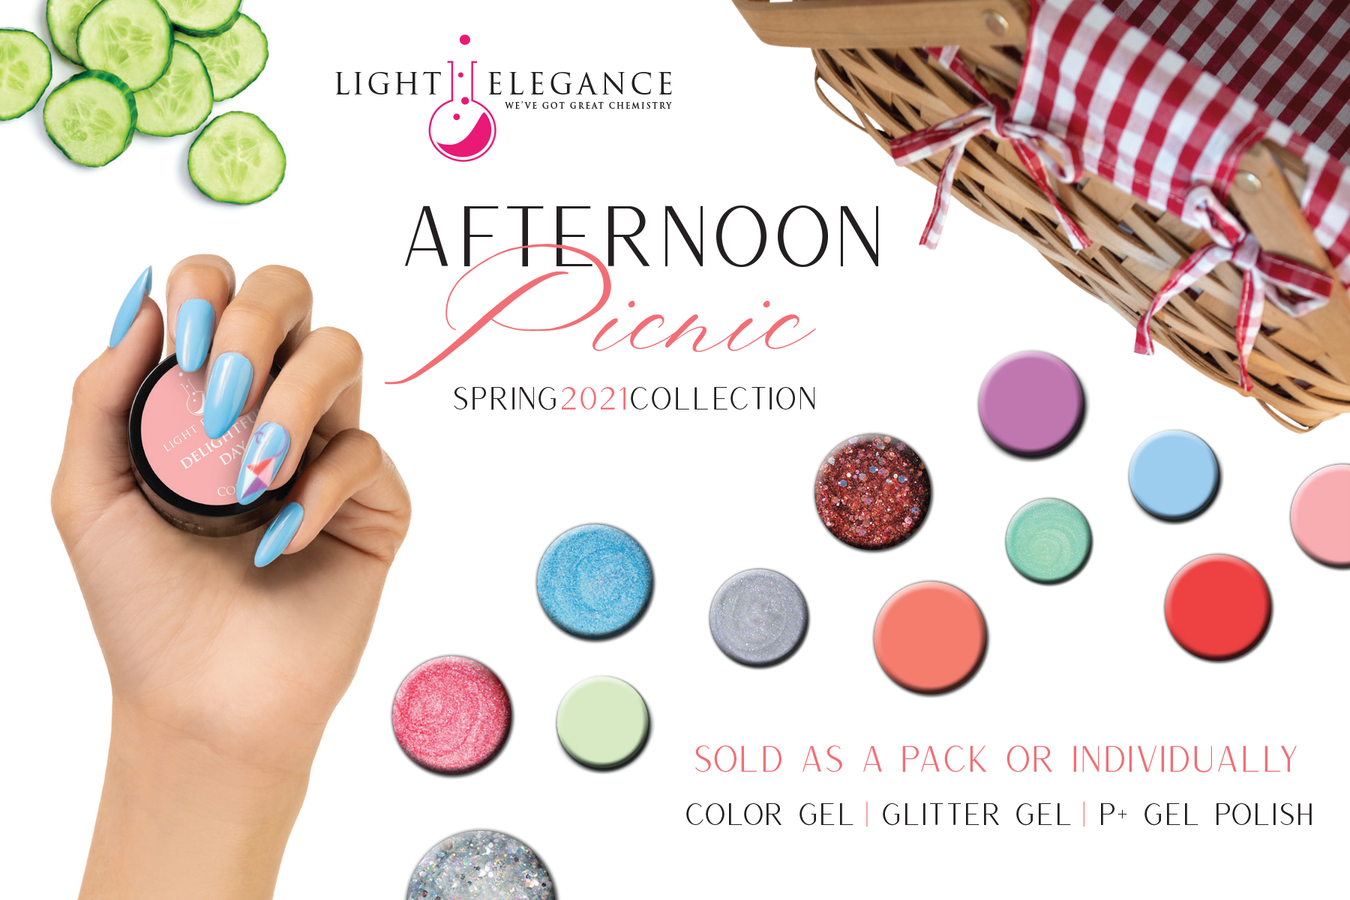 Afternoon Picnic Collection - Spring 2021 P+, Color & Glitter Gel